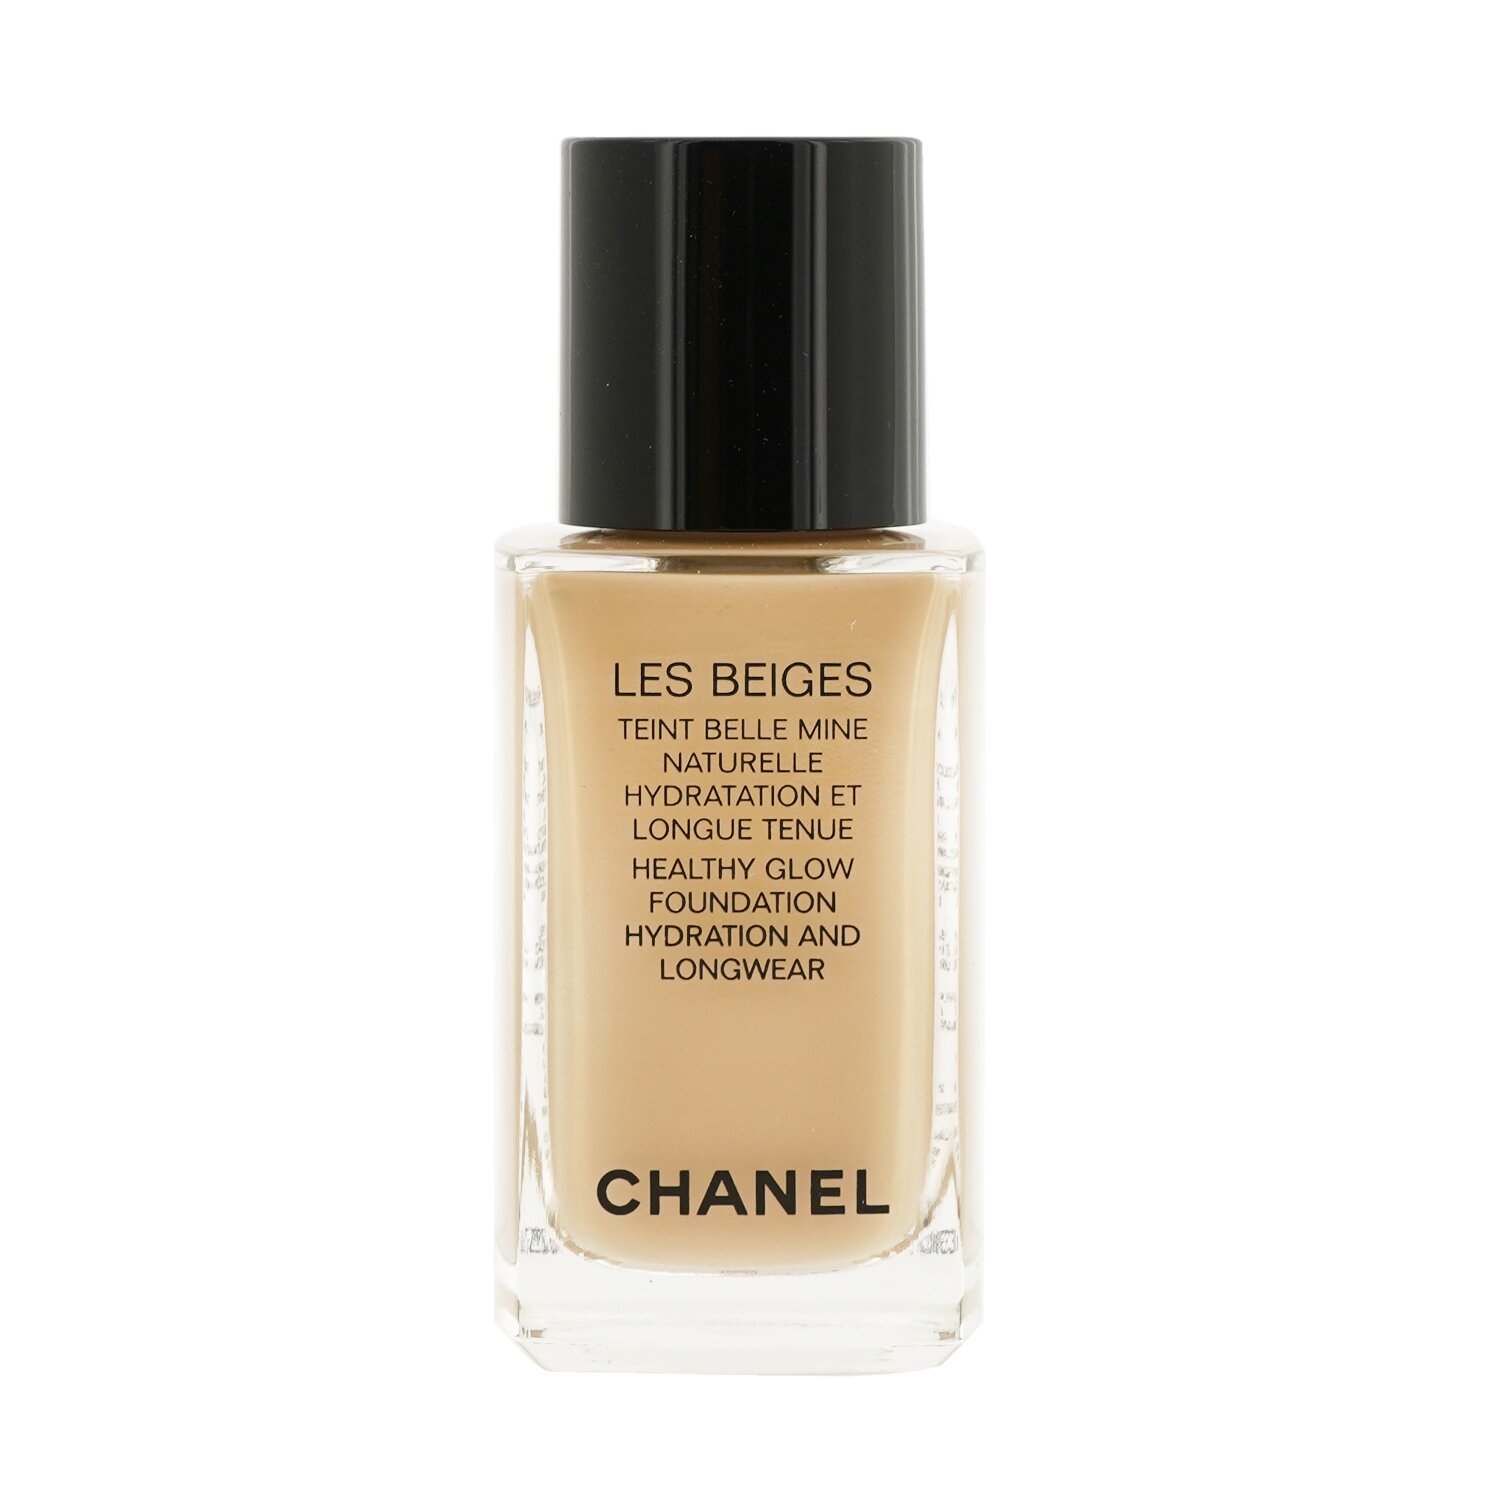 Chanel Les Beiges Healthy Glow Foundation Hydration and Longer in